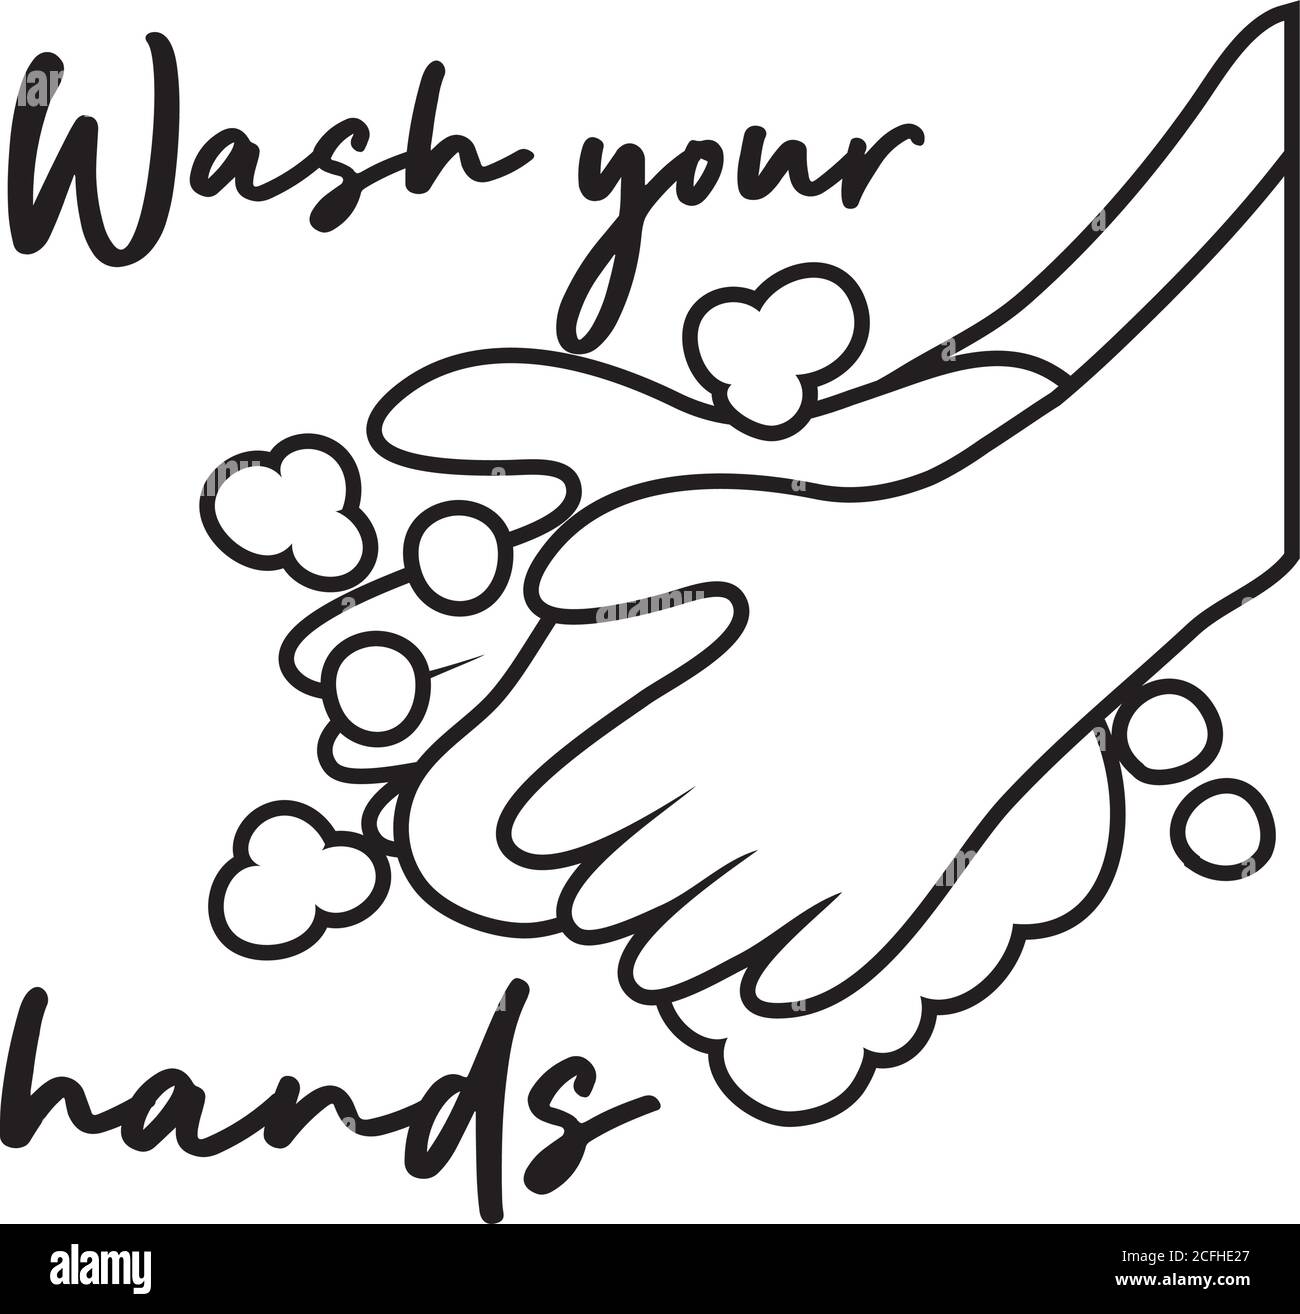 wash your hands campaign lettering with water and soap bar line style vector illustration design Stock Vector